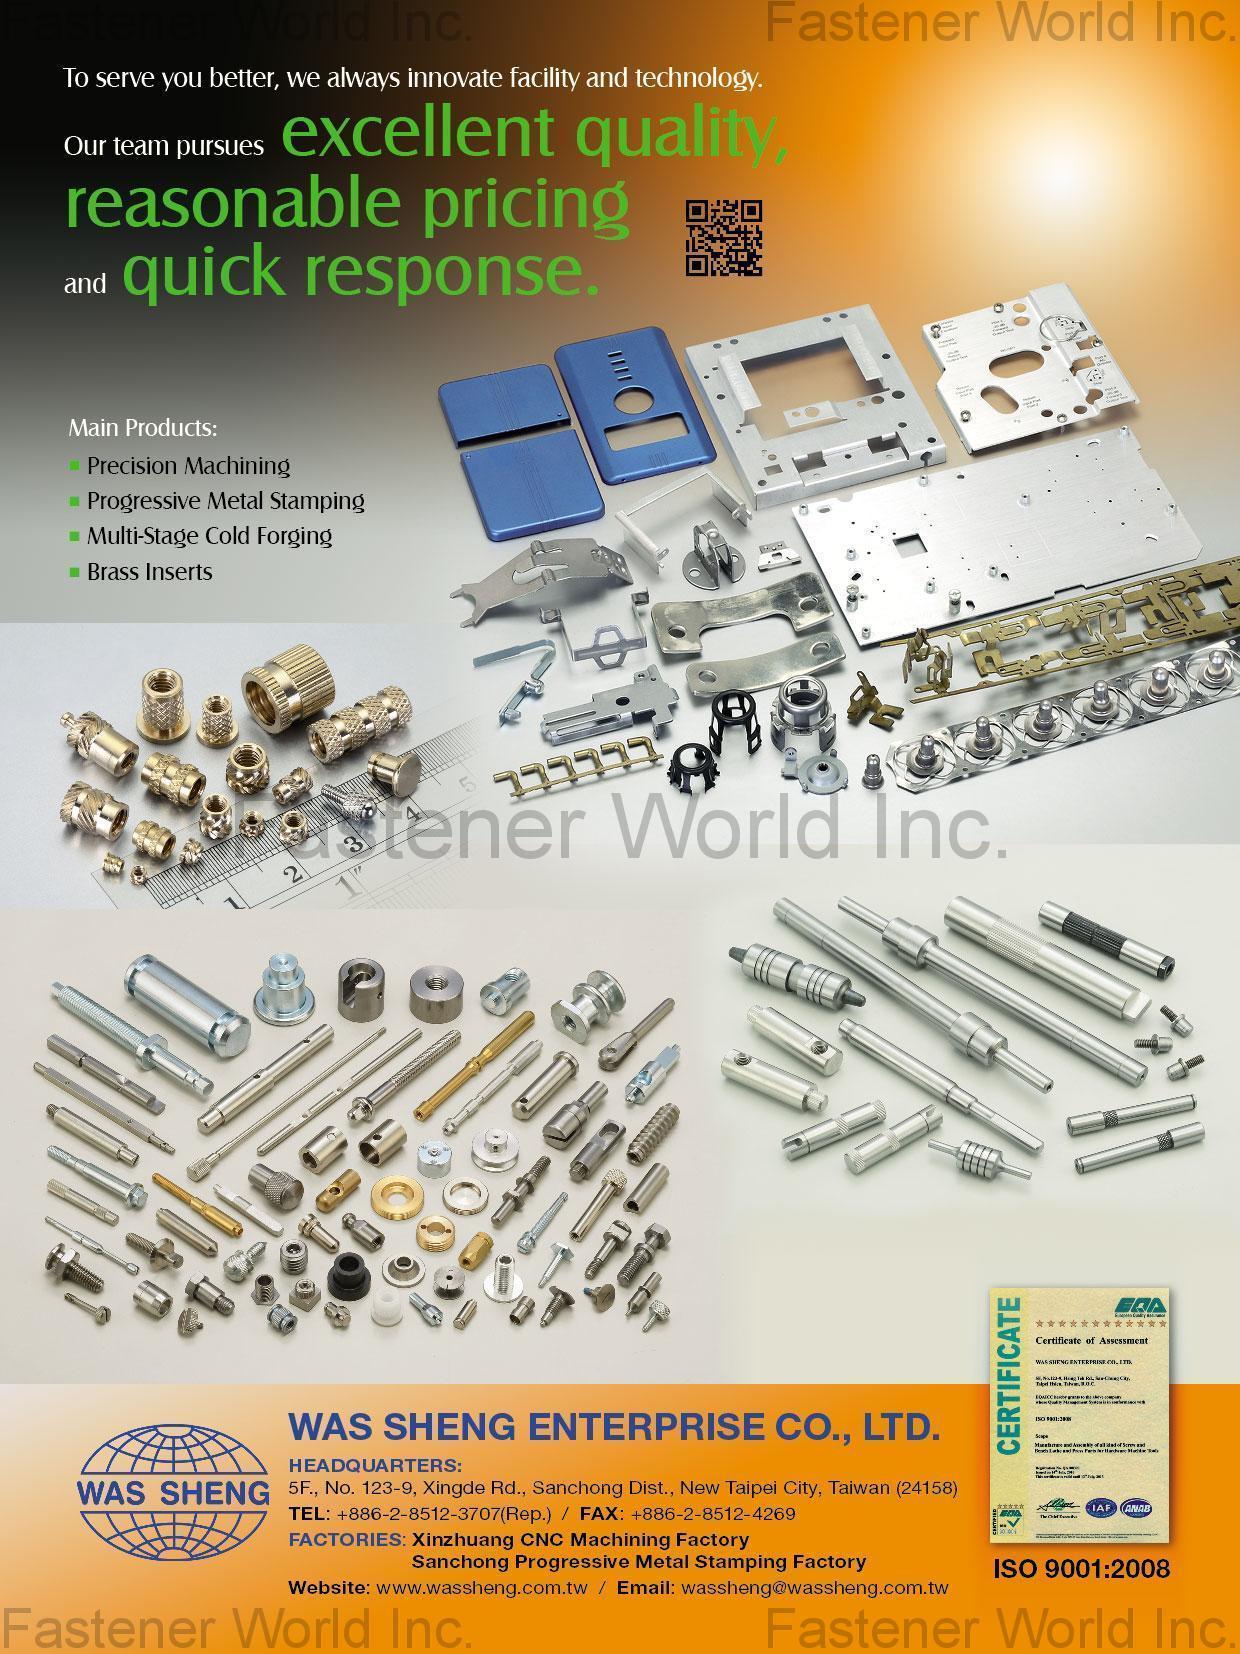 WAS SHENG ENTERPRISE CO., LTD. , Precision Machining, Progressive Metal Stamping, Multi-Stage Cold Forging, Brass Inserts , Cnc Machining Parts